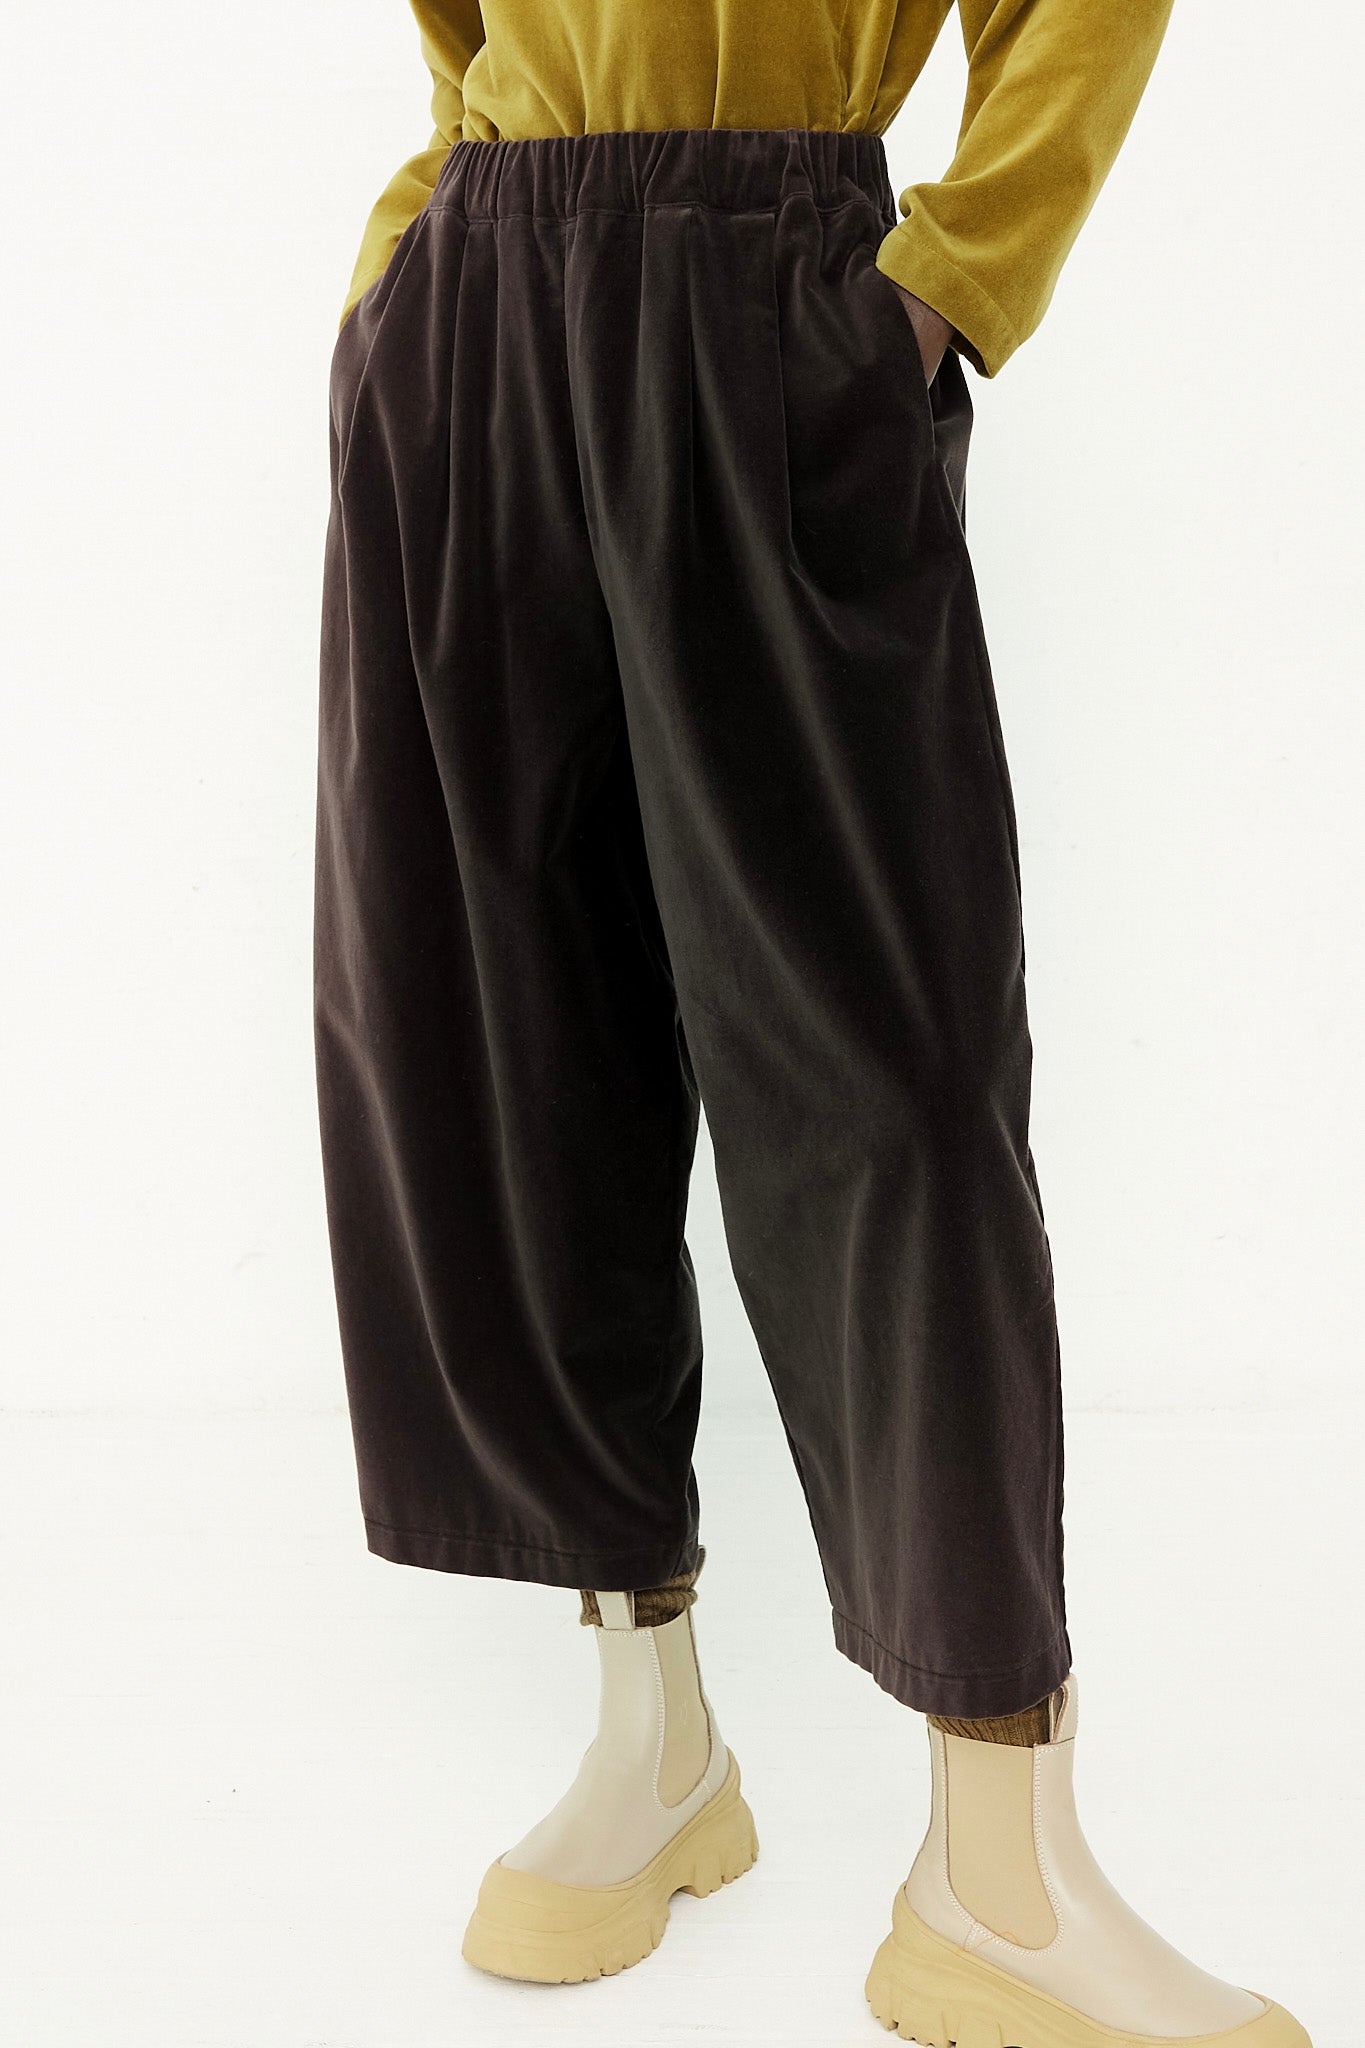 A woman wearing a yellow shirt and Black Crane cotton velveteen wide leg pants in Sumi Black.